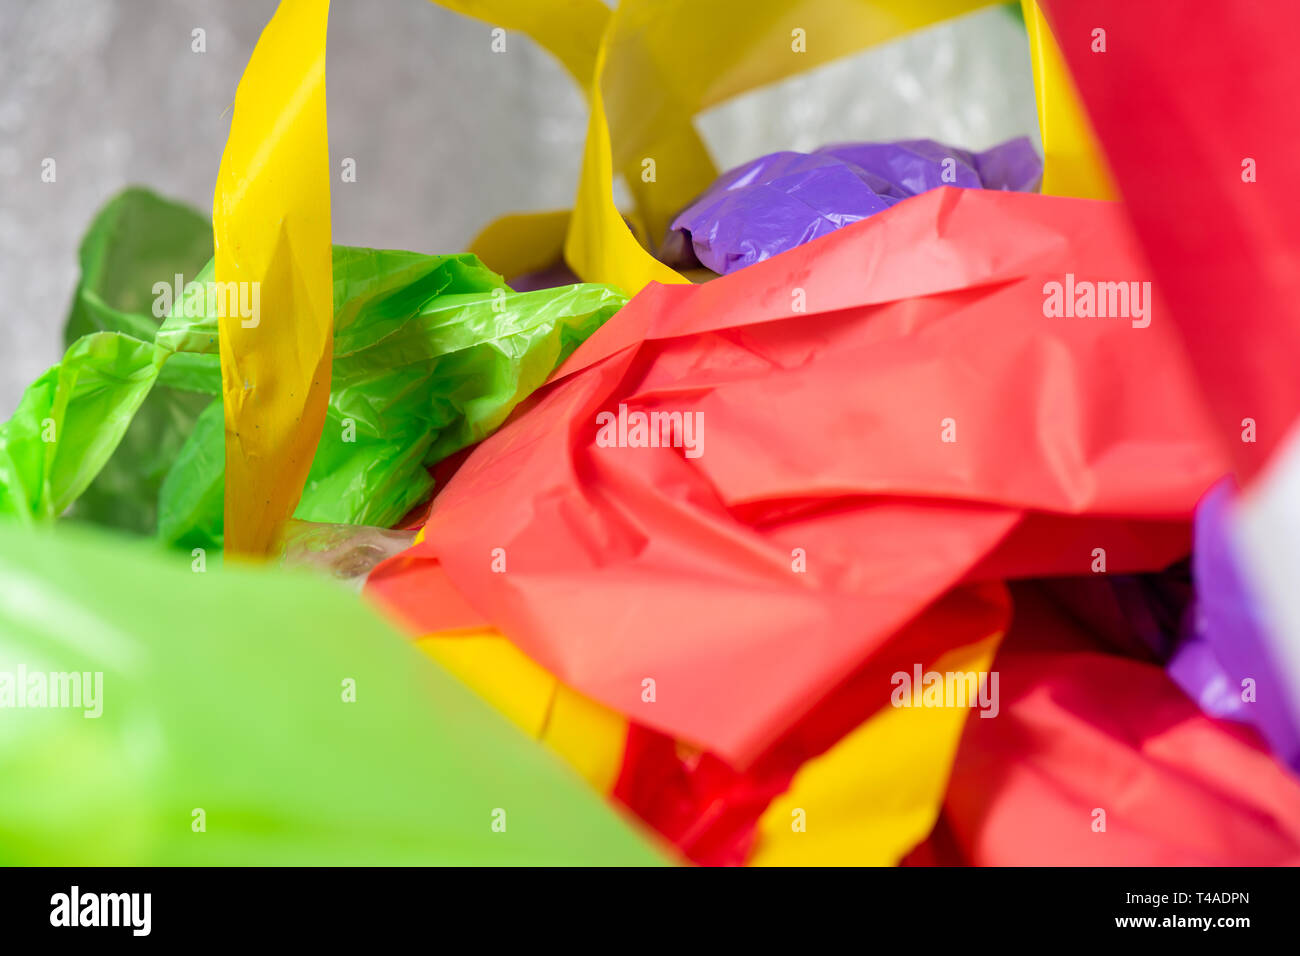 https://c8.alamy.com/comp/T4ADPN/bright-colorful-disposal-bags-and-materials-made-from-non-decomposable-plastic-T4ADPN.jpg